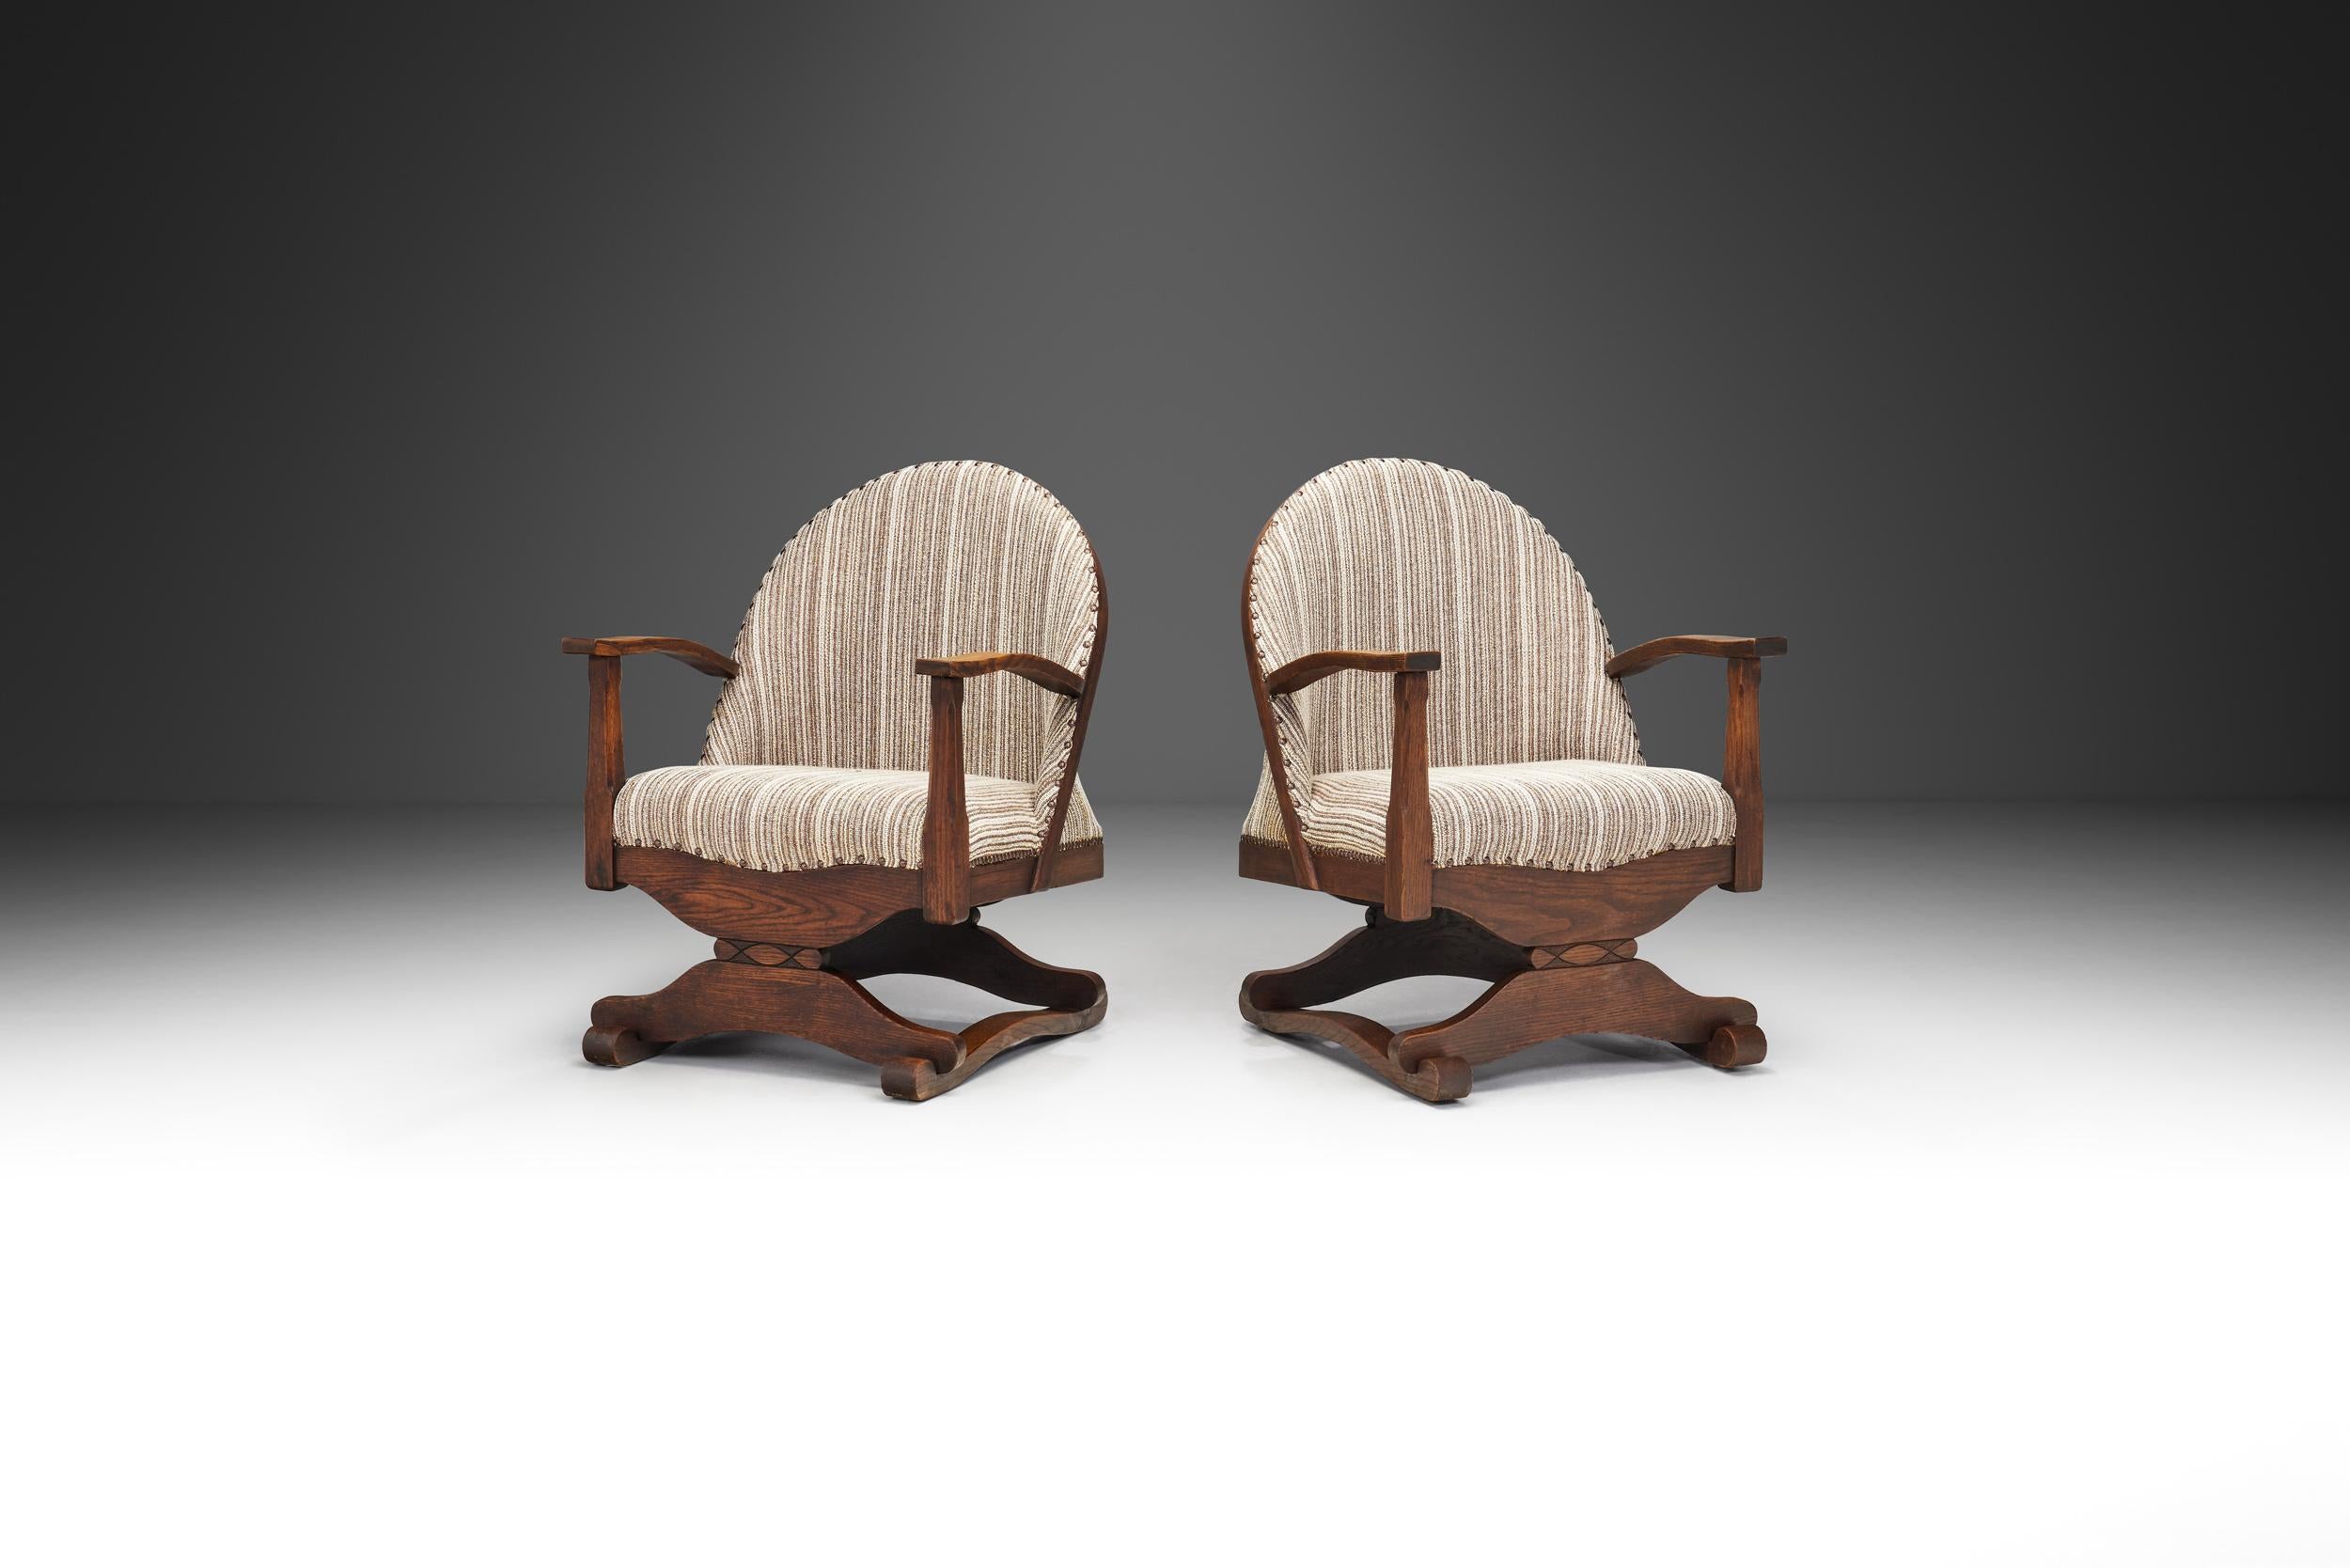 In the realm of Spanish furniture design, the 1930s were a pivotal era that witnessed the emergence of distinctive styles and innovative craftsmanship. Among the unique pieces created in this period is this pair of Spanish lounge chairs that